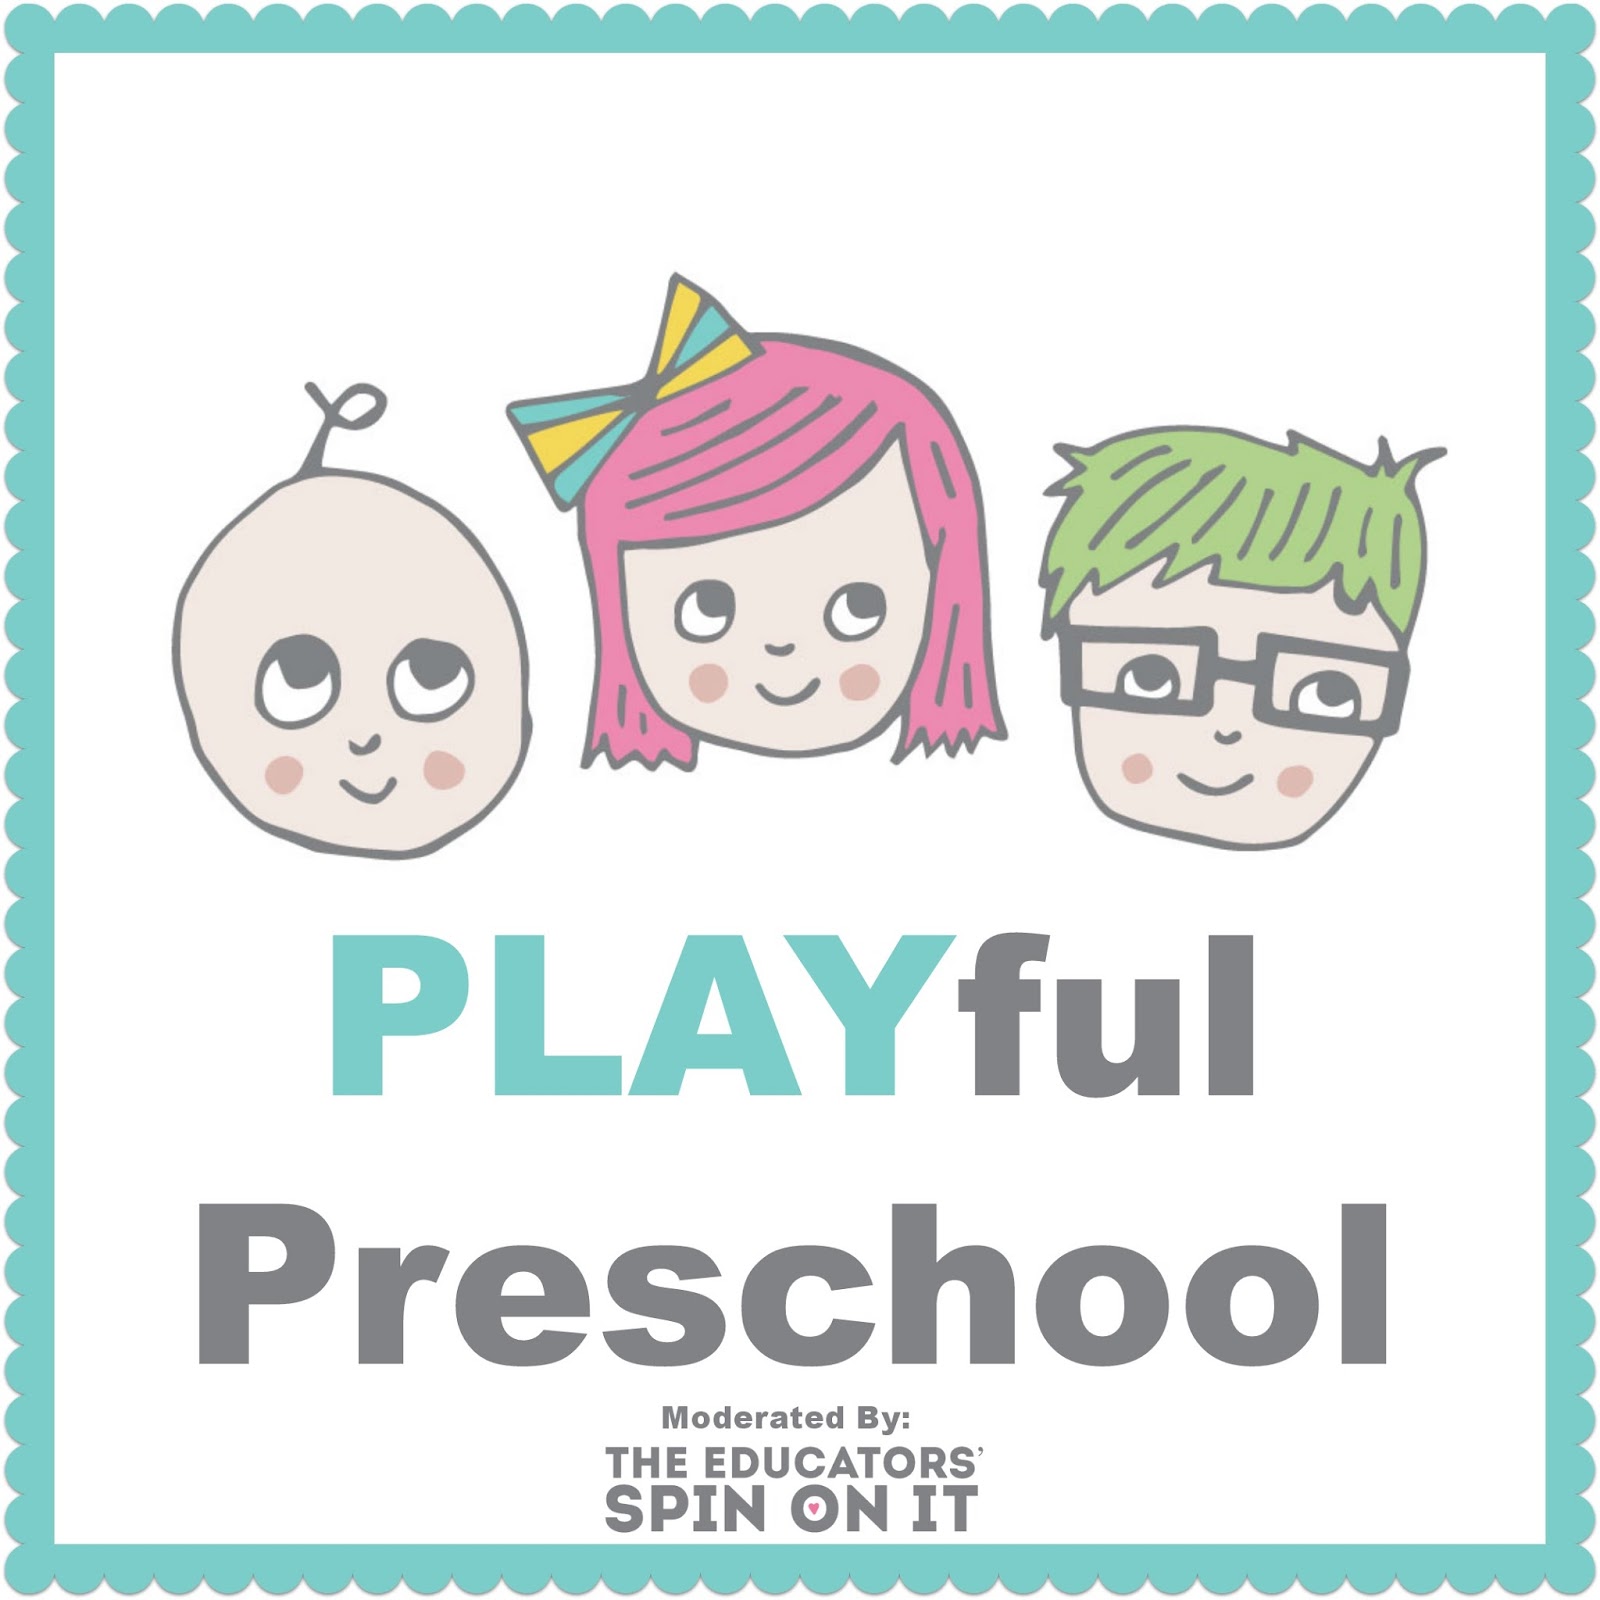 Review of the Playful Preschool Virtual Homeschool Group hosted by Educators' Spin On It | Kids Yoga Stories